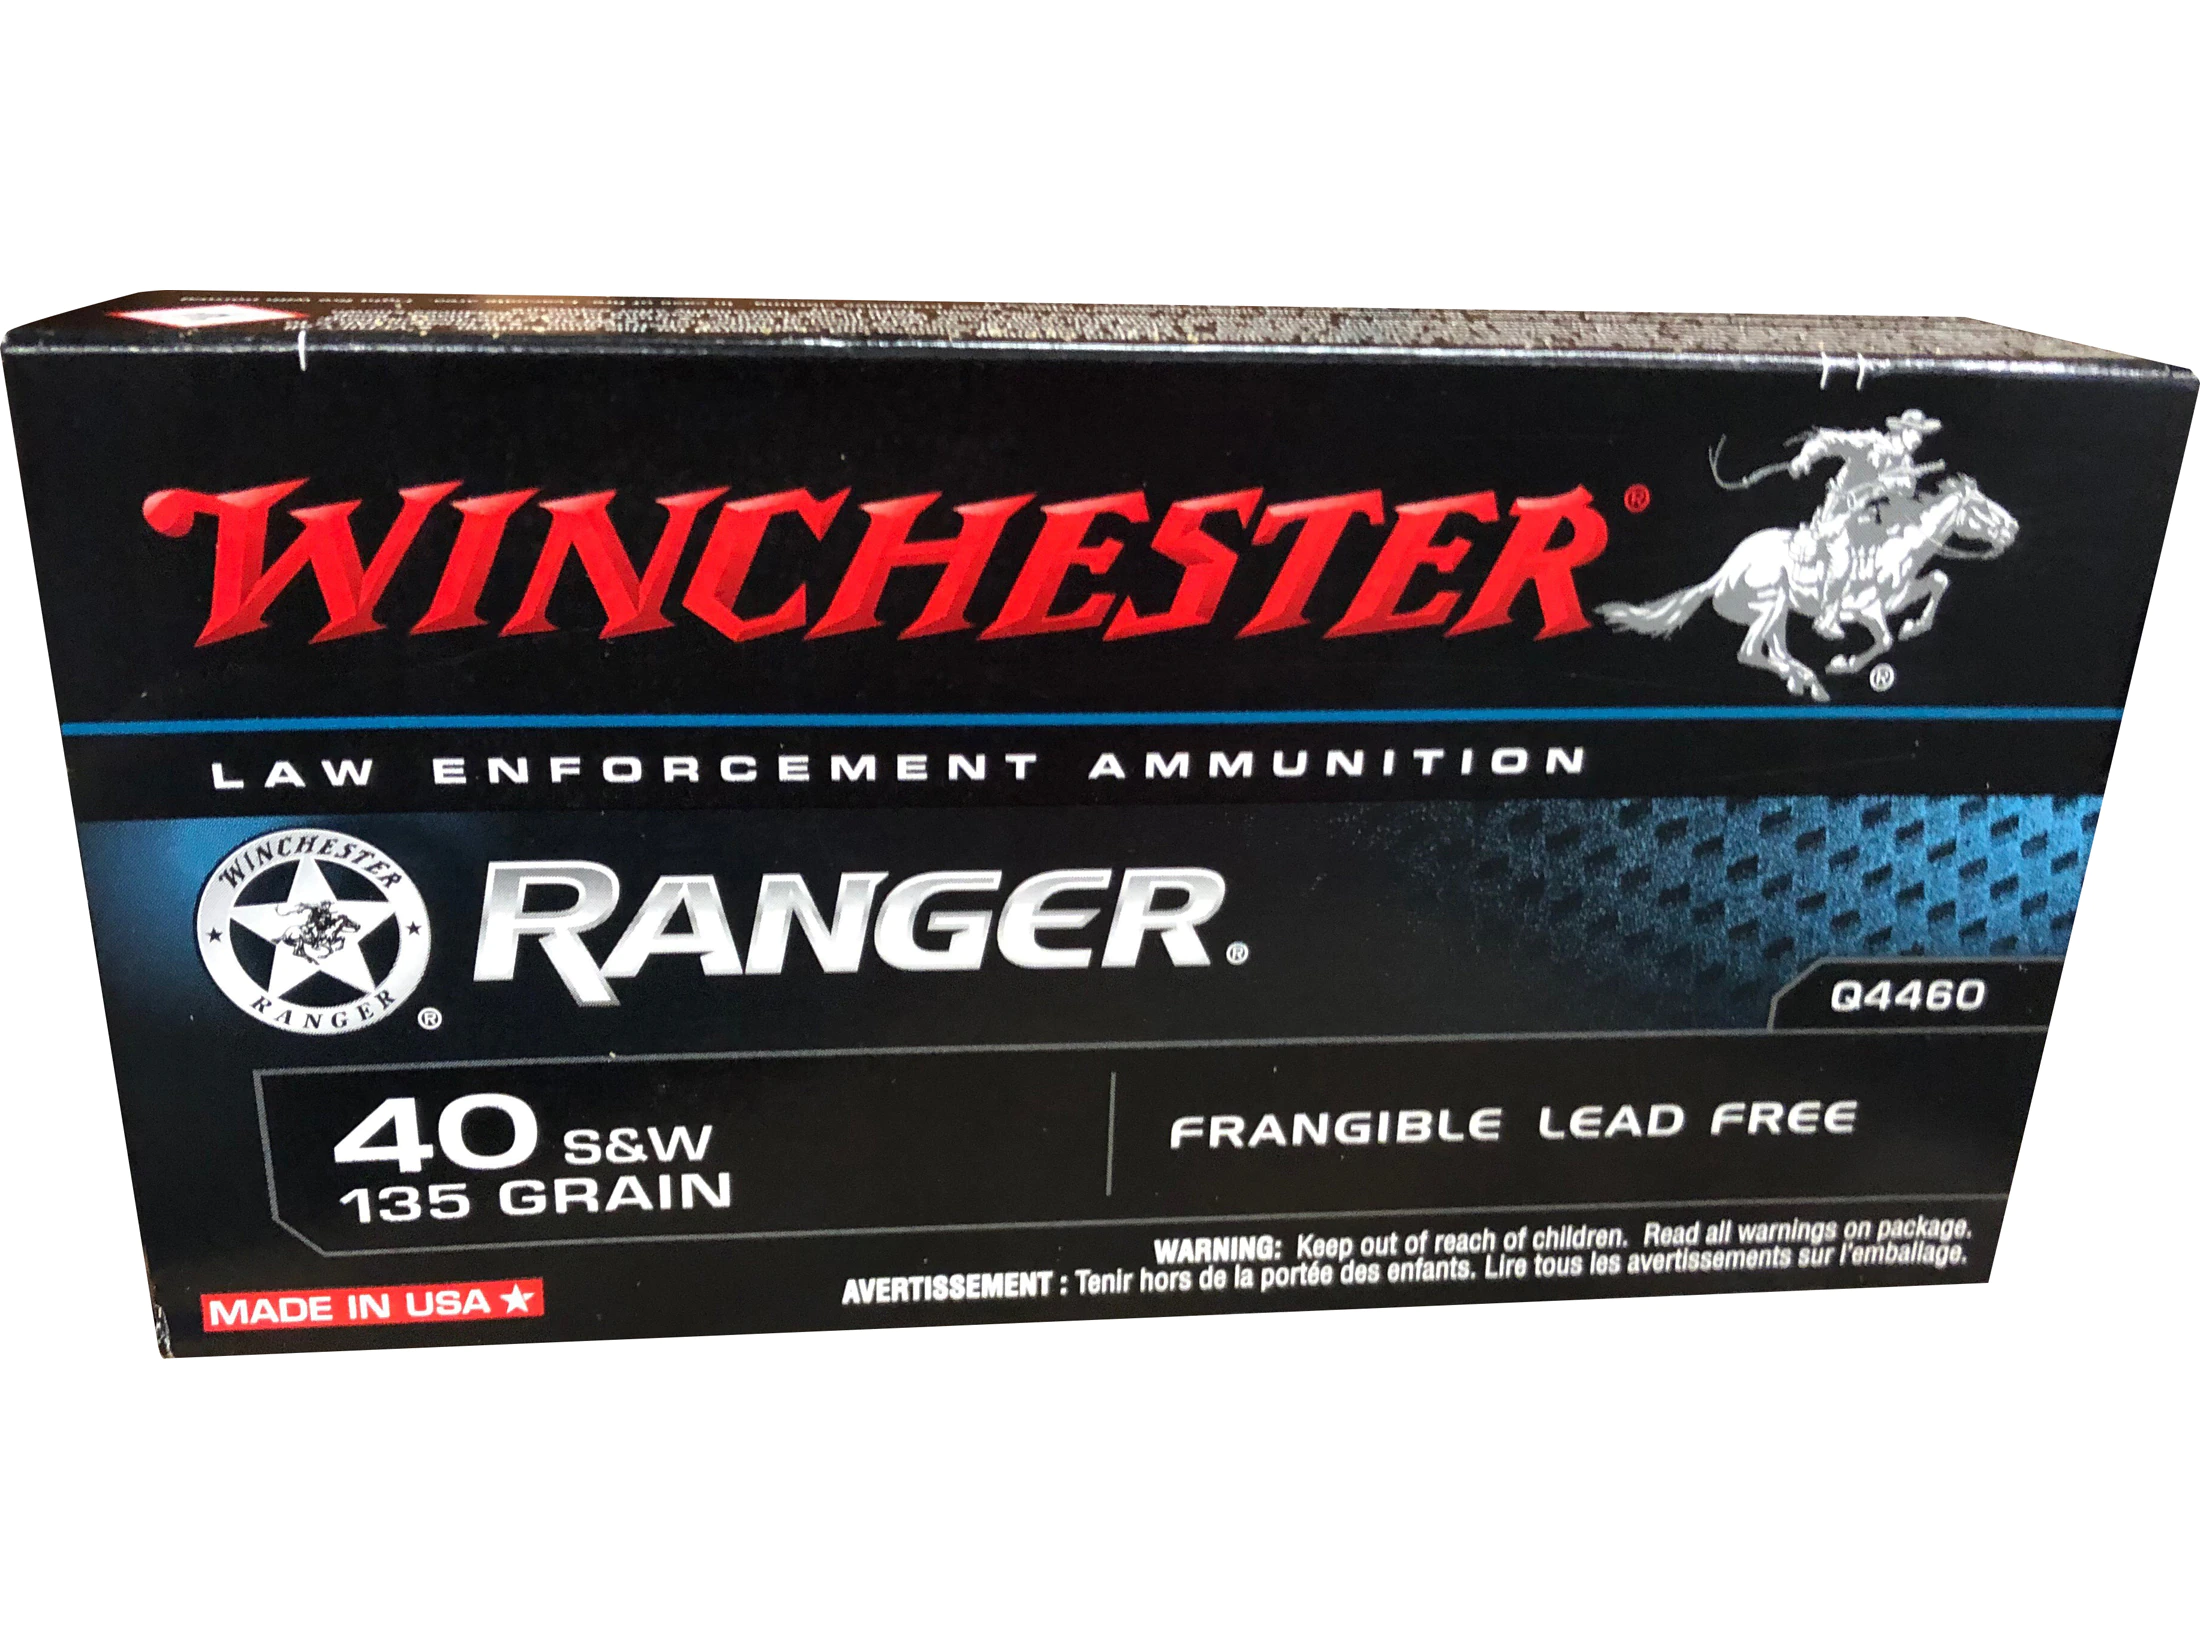 Image of Winchester Ranger Law Enforcement Ammunition 40 S&W 135 Grain Frangible Flat Nose Lead Free Box of 50